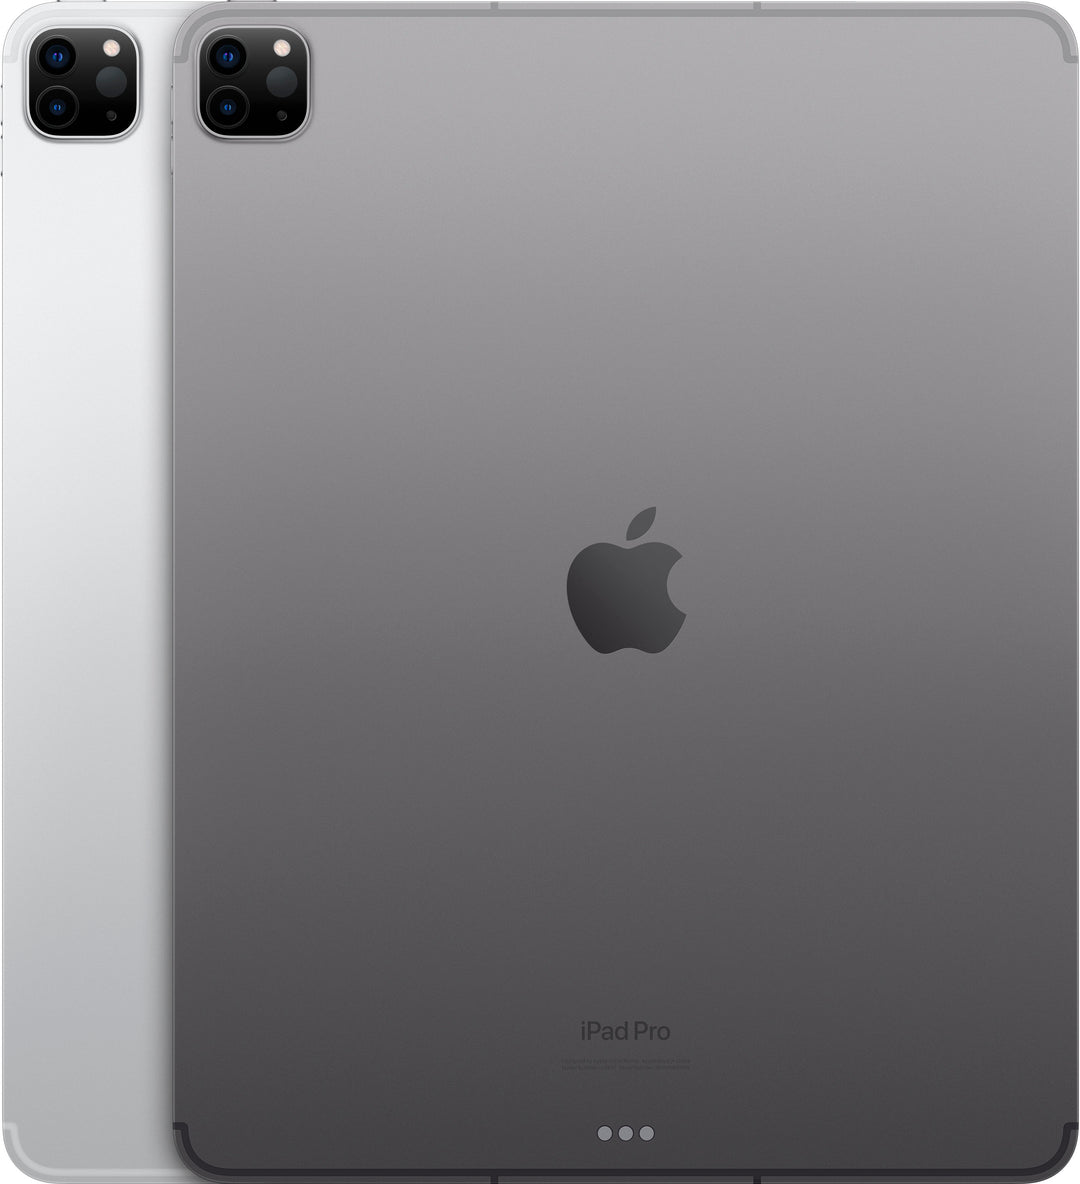 Apple - 12.9-Inch iPad Pro (Latest Model) with Wi-Fi + Cellular - 2TB - Space Gray (AT&T)_3